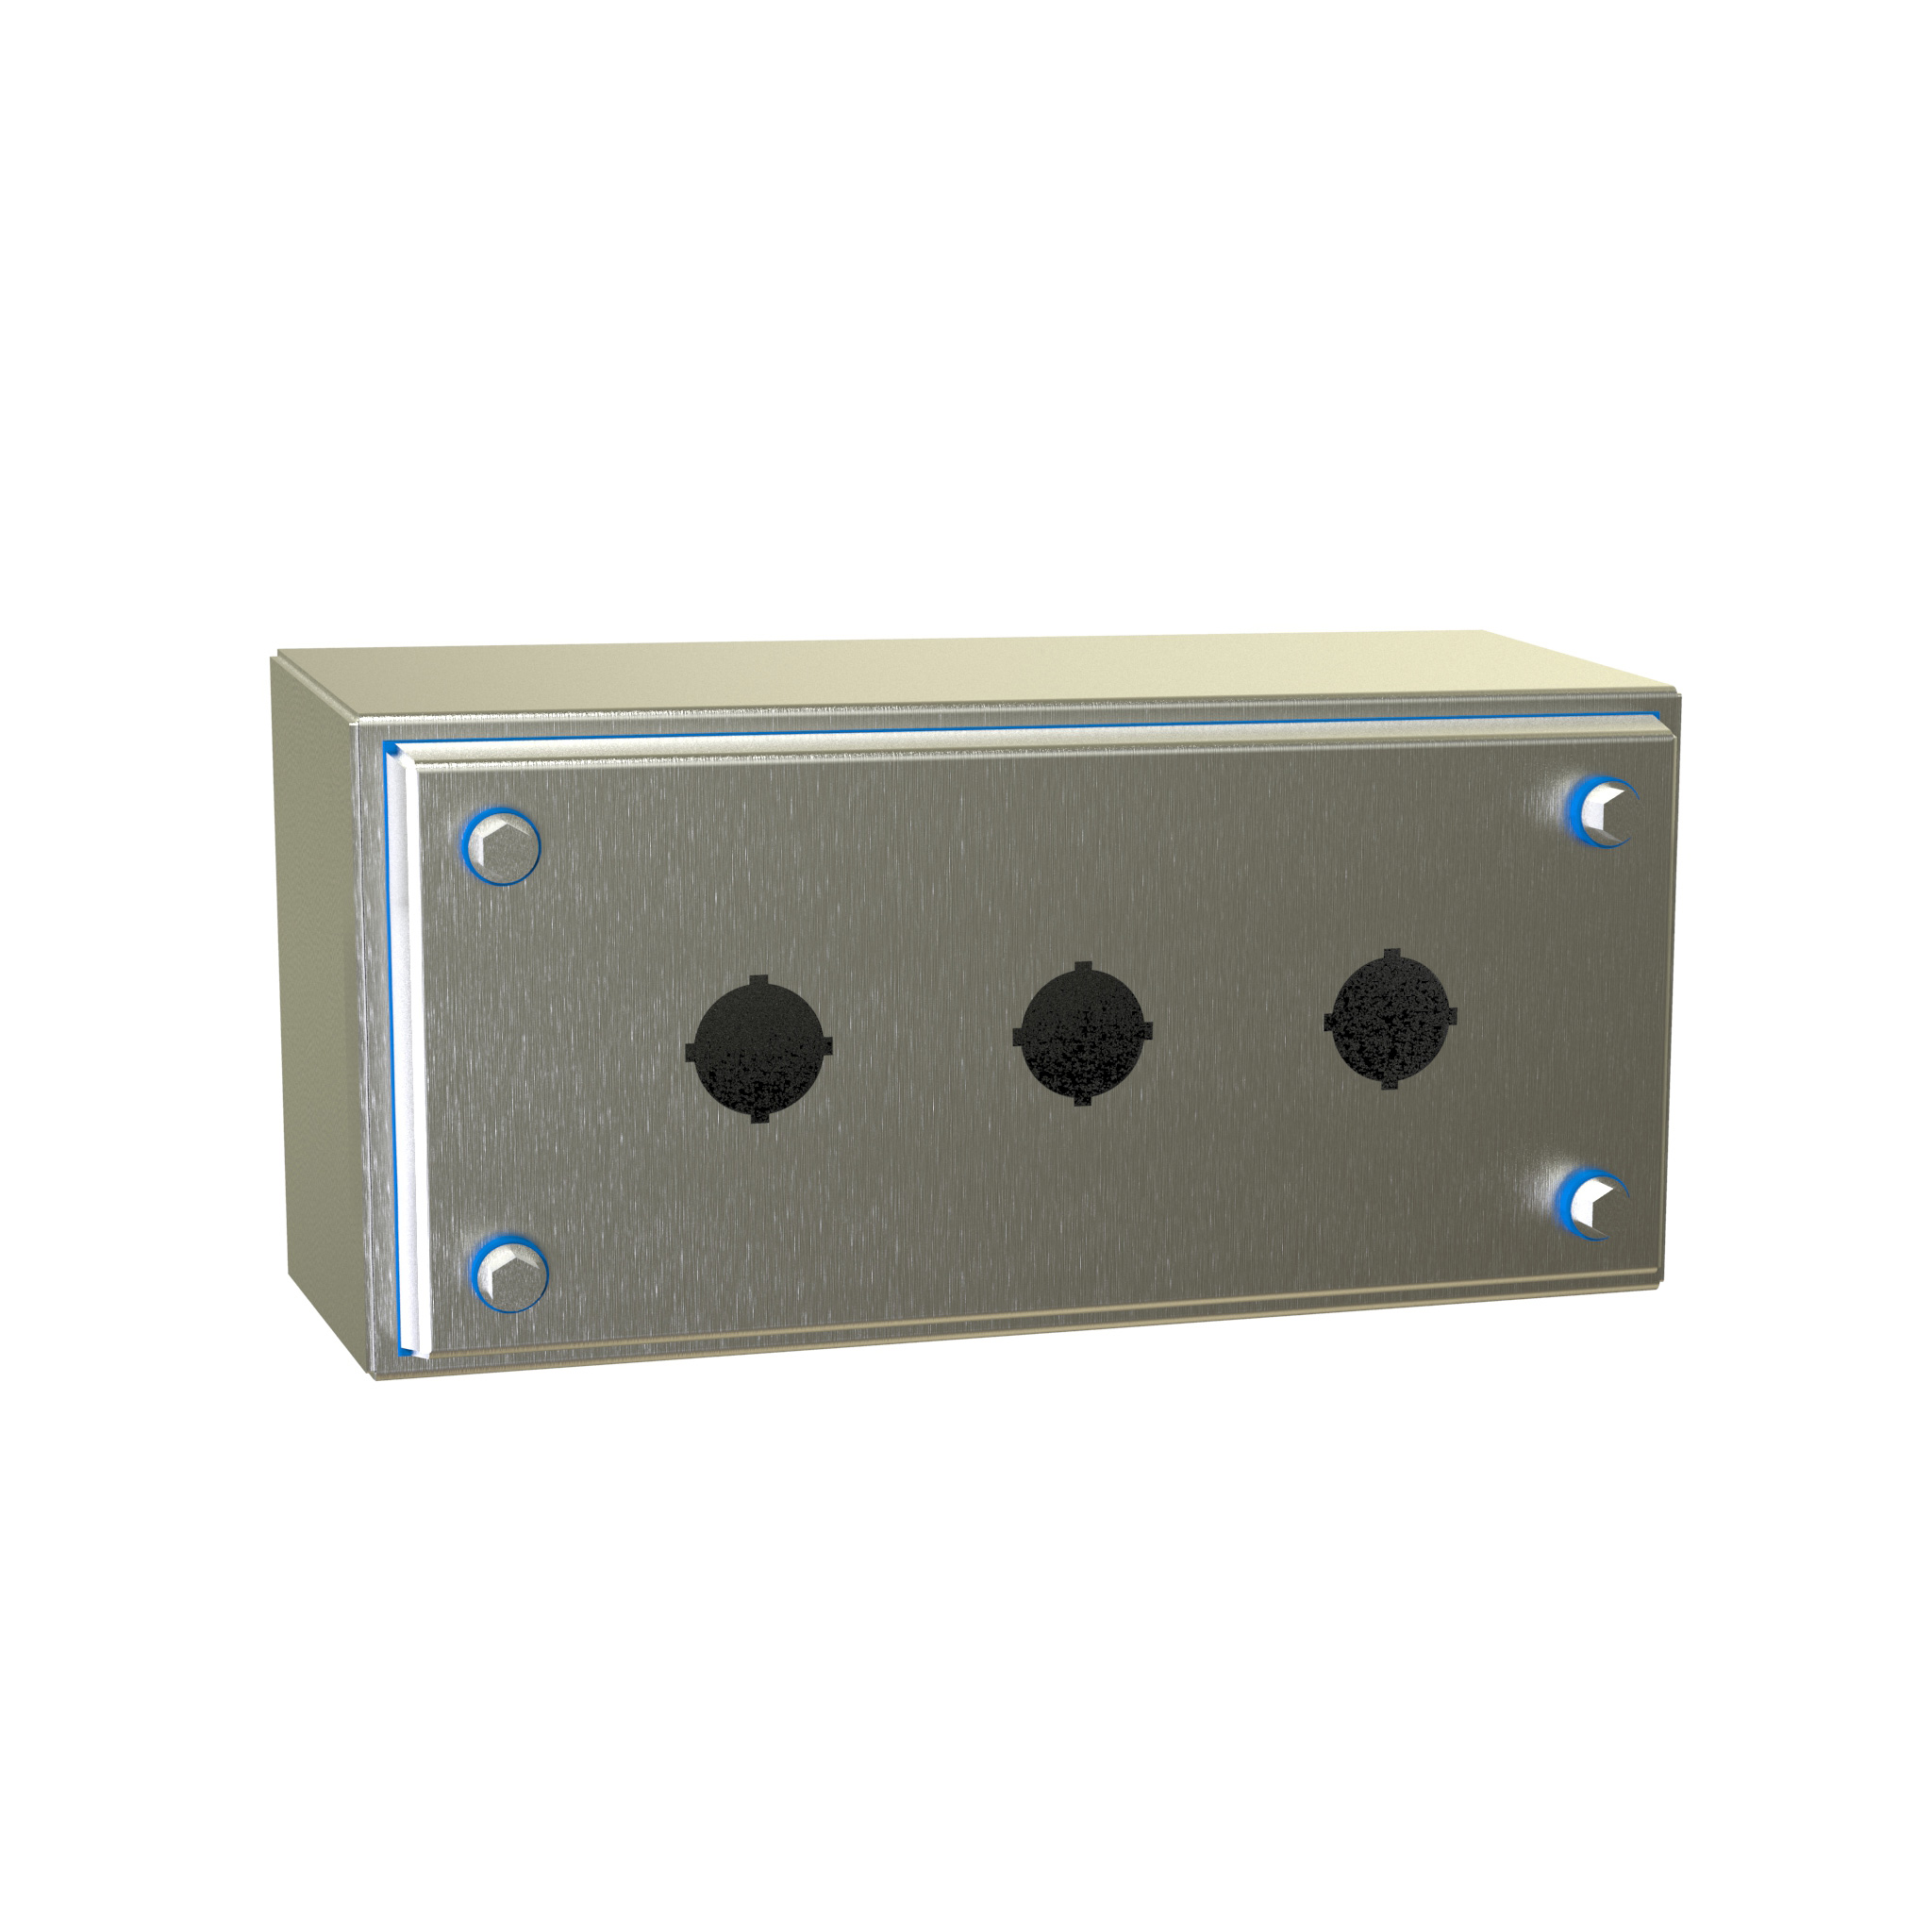 Hammond Manufacturing - Hygienic Type 4X Stainless Steel Pushbutton Enclosure